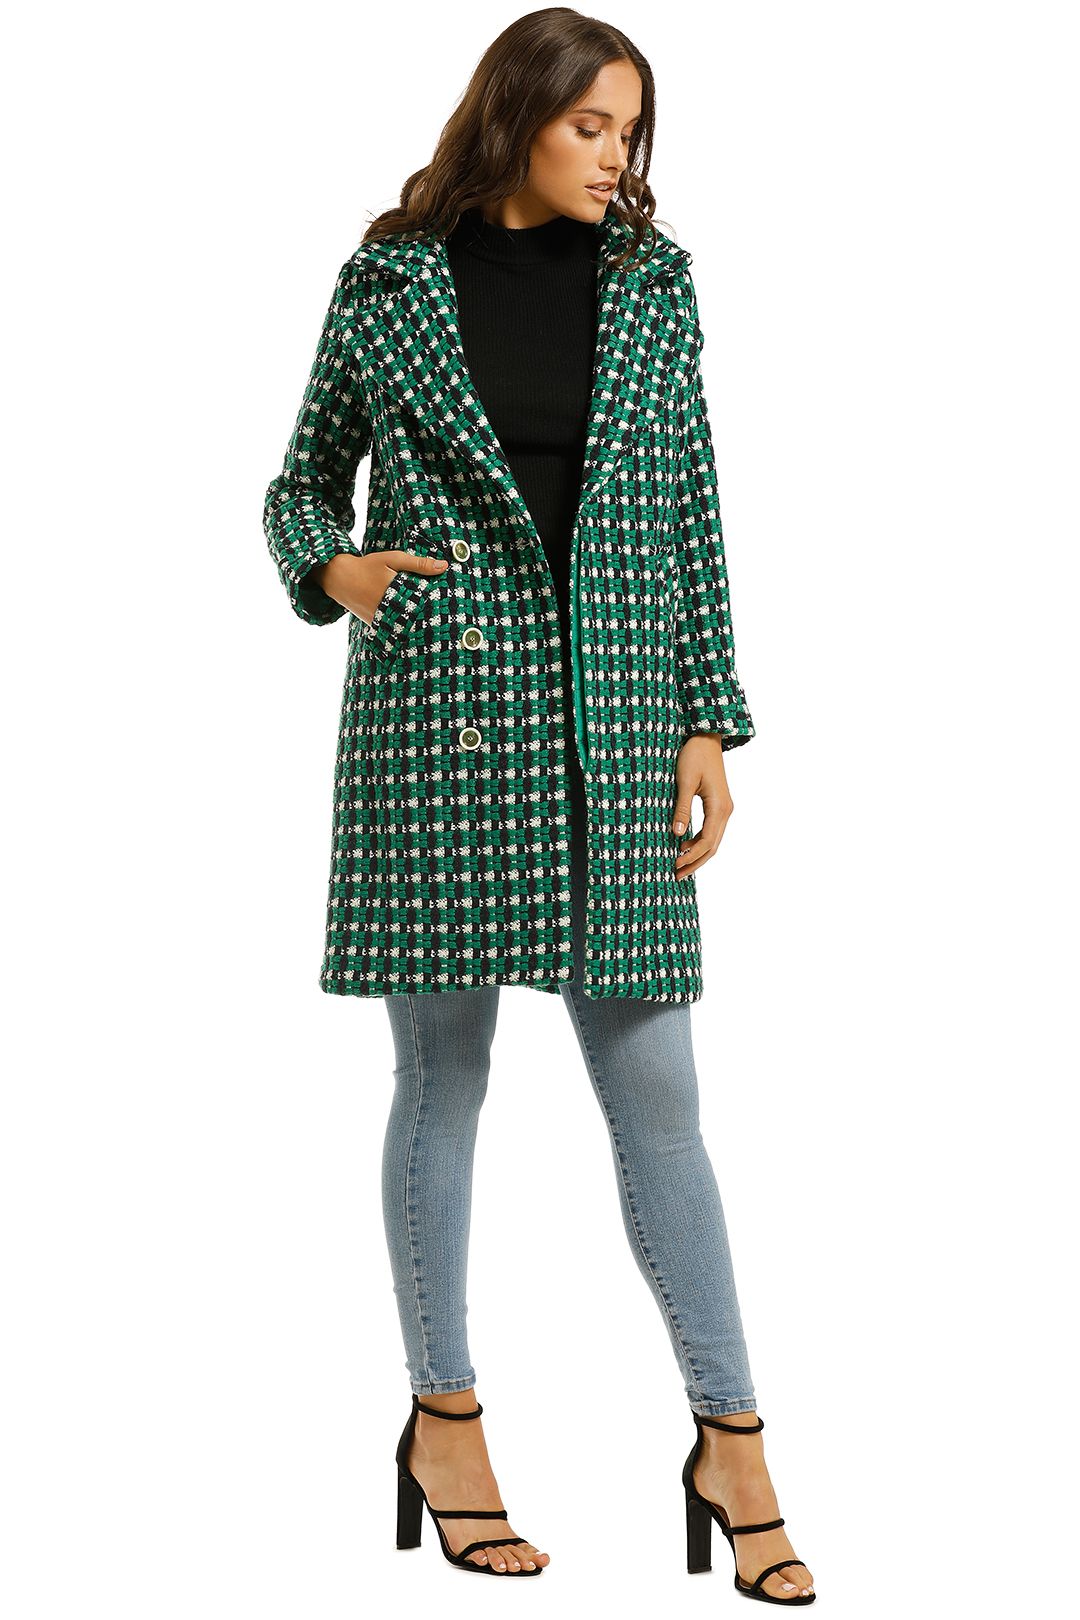 Coop-by-Trelise-Cooper-Rock-The-Coat-Green-Plaid-Side